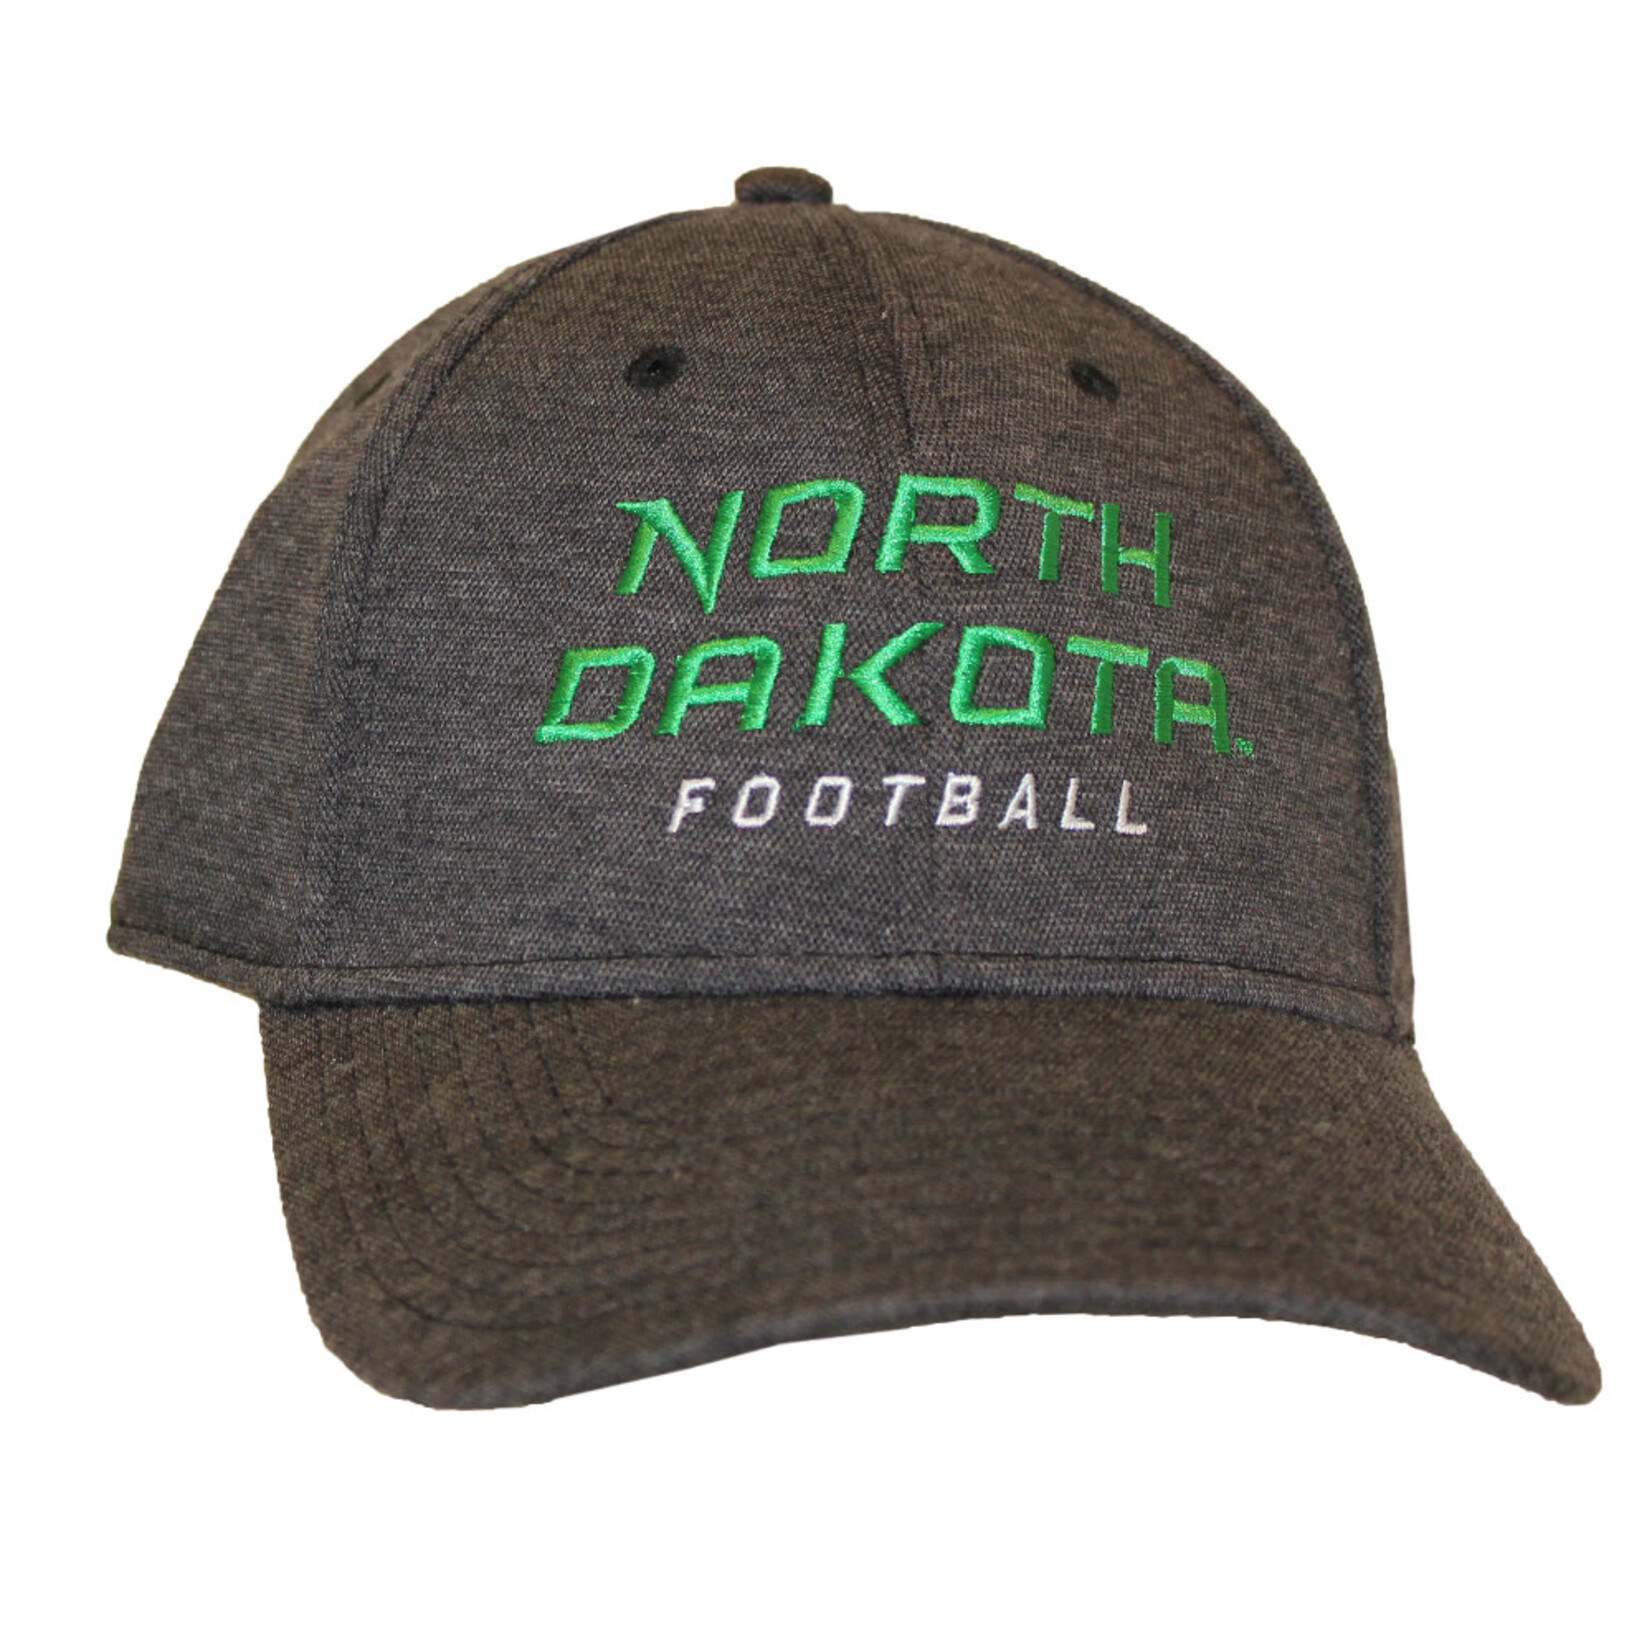 The Game Football Pique Low Pro Hat - Black